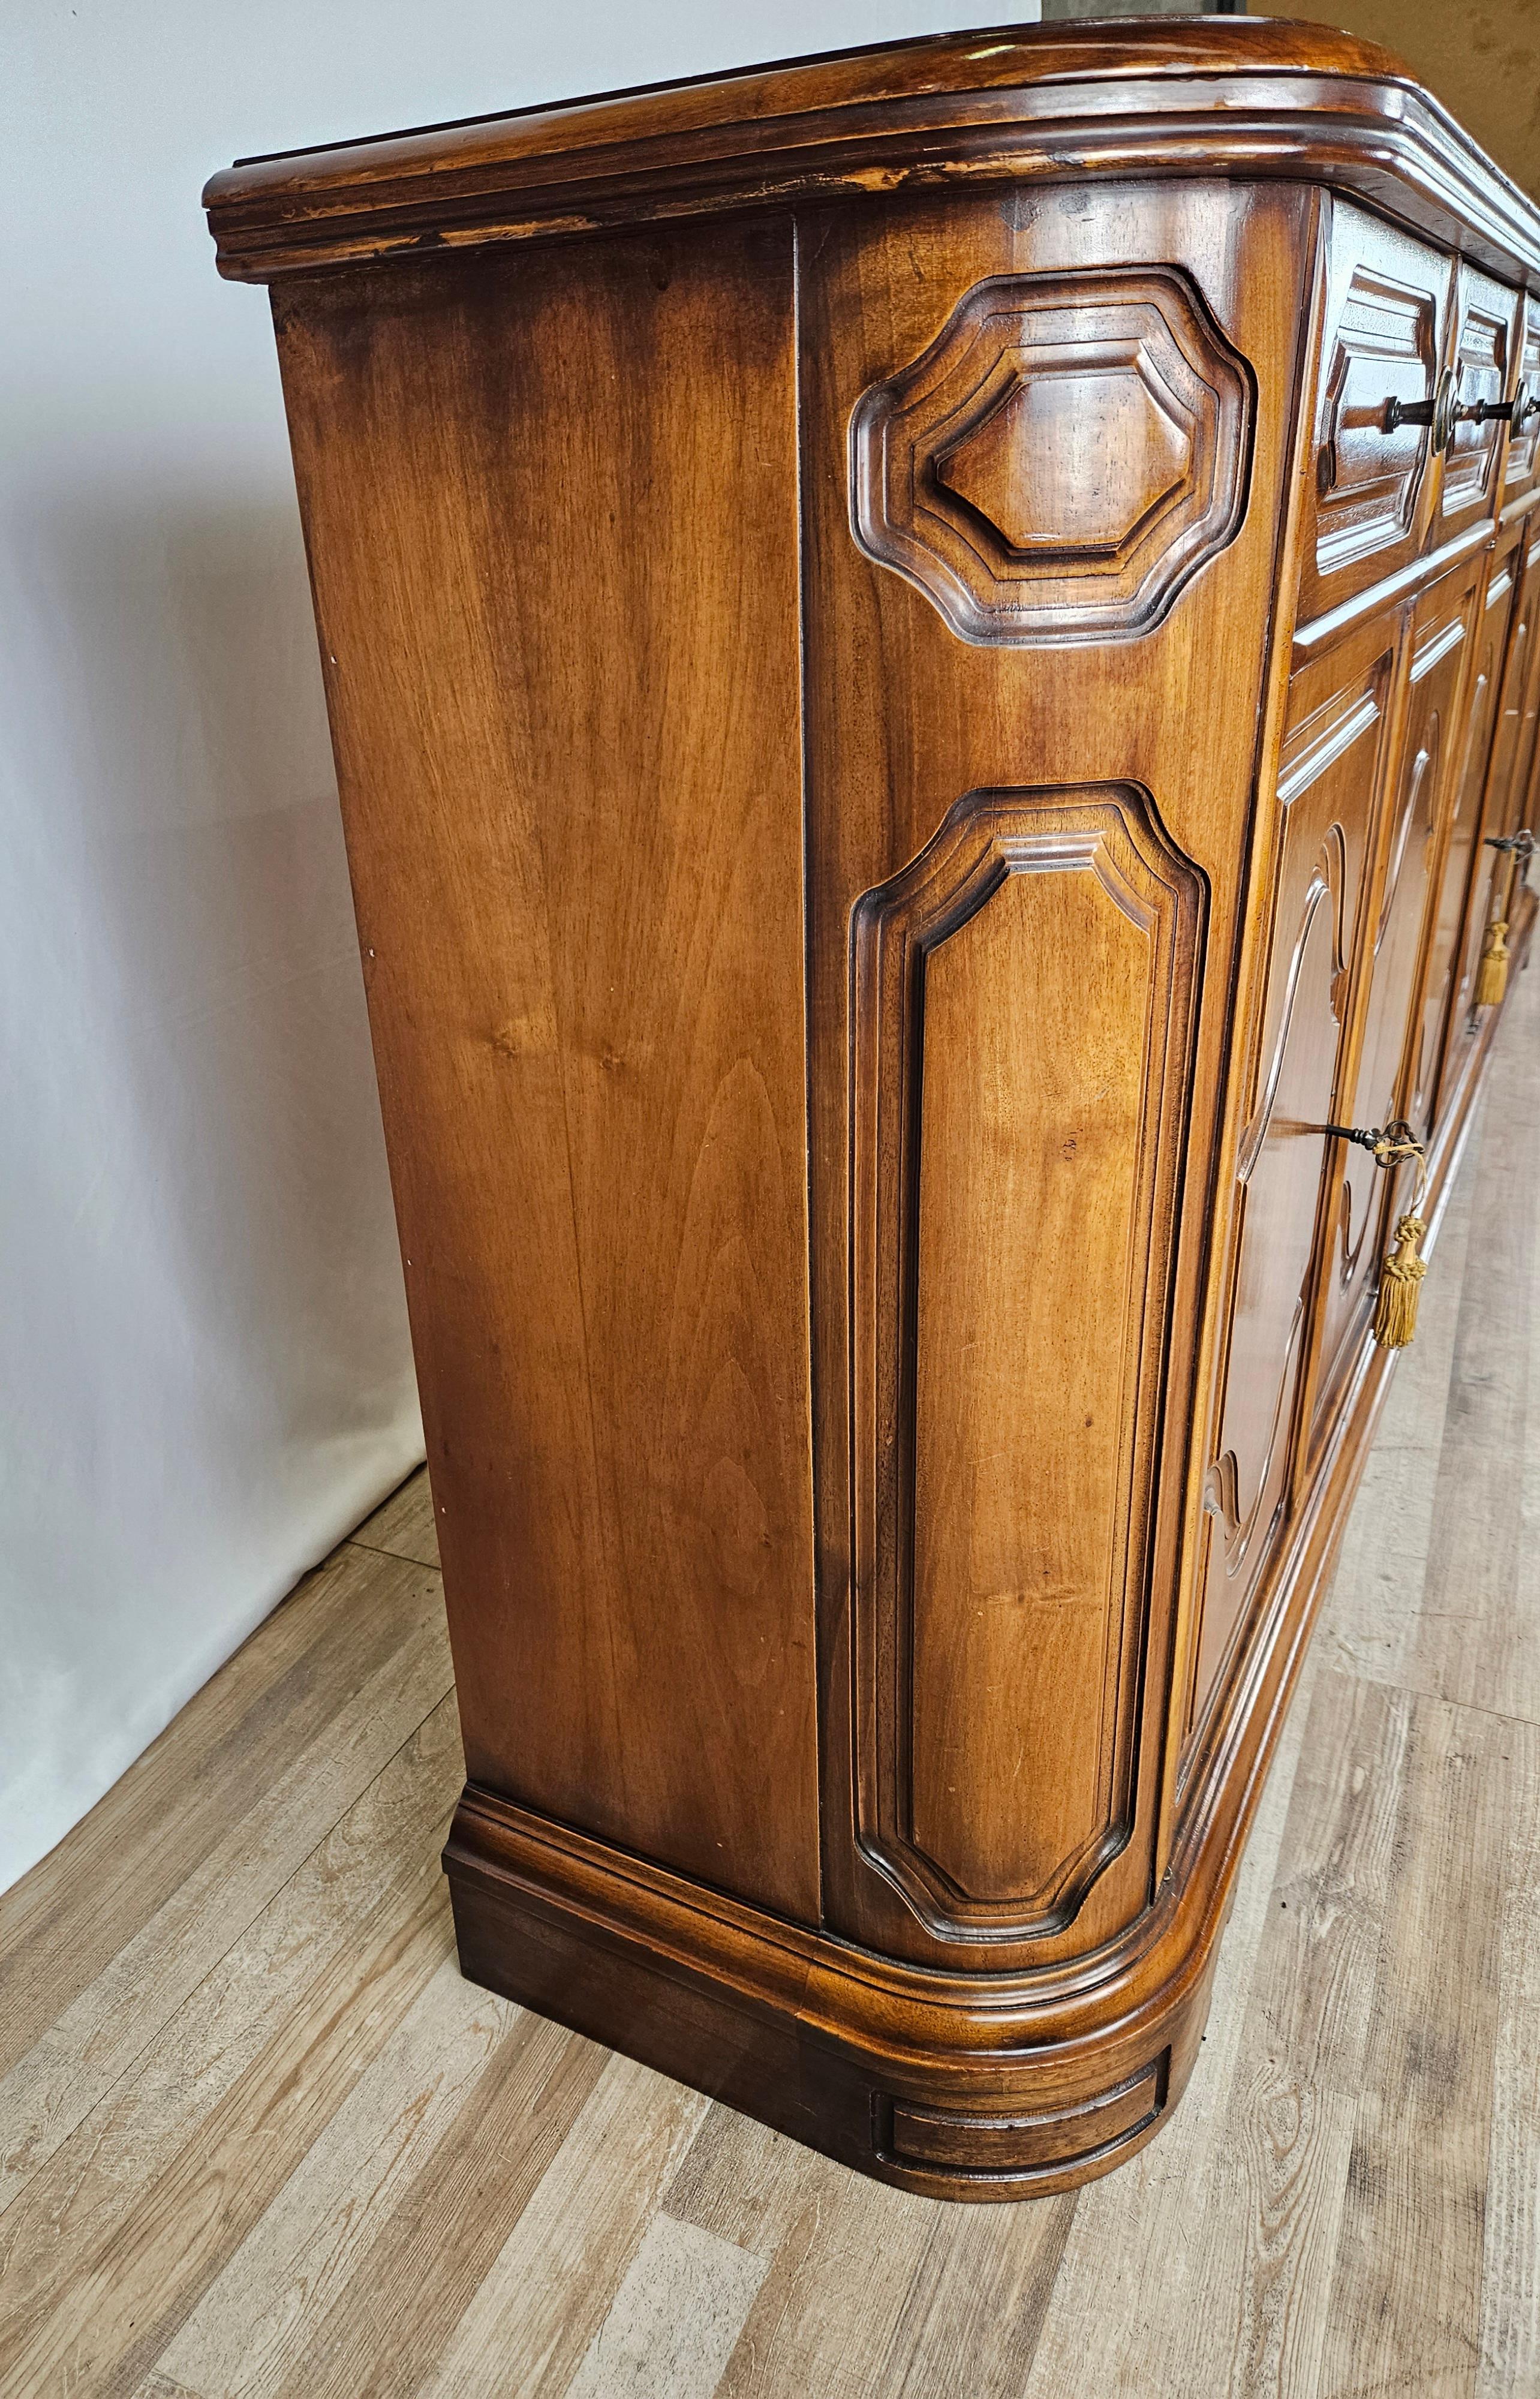 Large hall or kitchen sideboard with carved work along the doors and frame.

Early 1960s/70s wooden cabinet with as many as six drawers and six large doors with interior shelves.

The sideboard can be accompanied by modern furniture,  shabby or goes